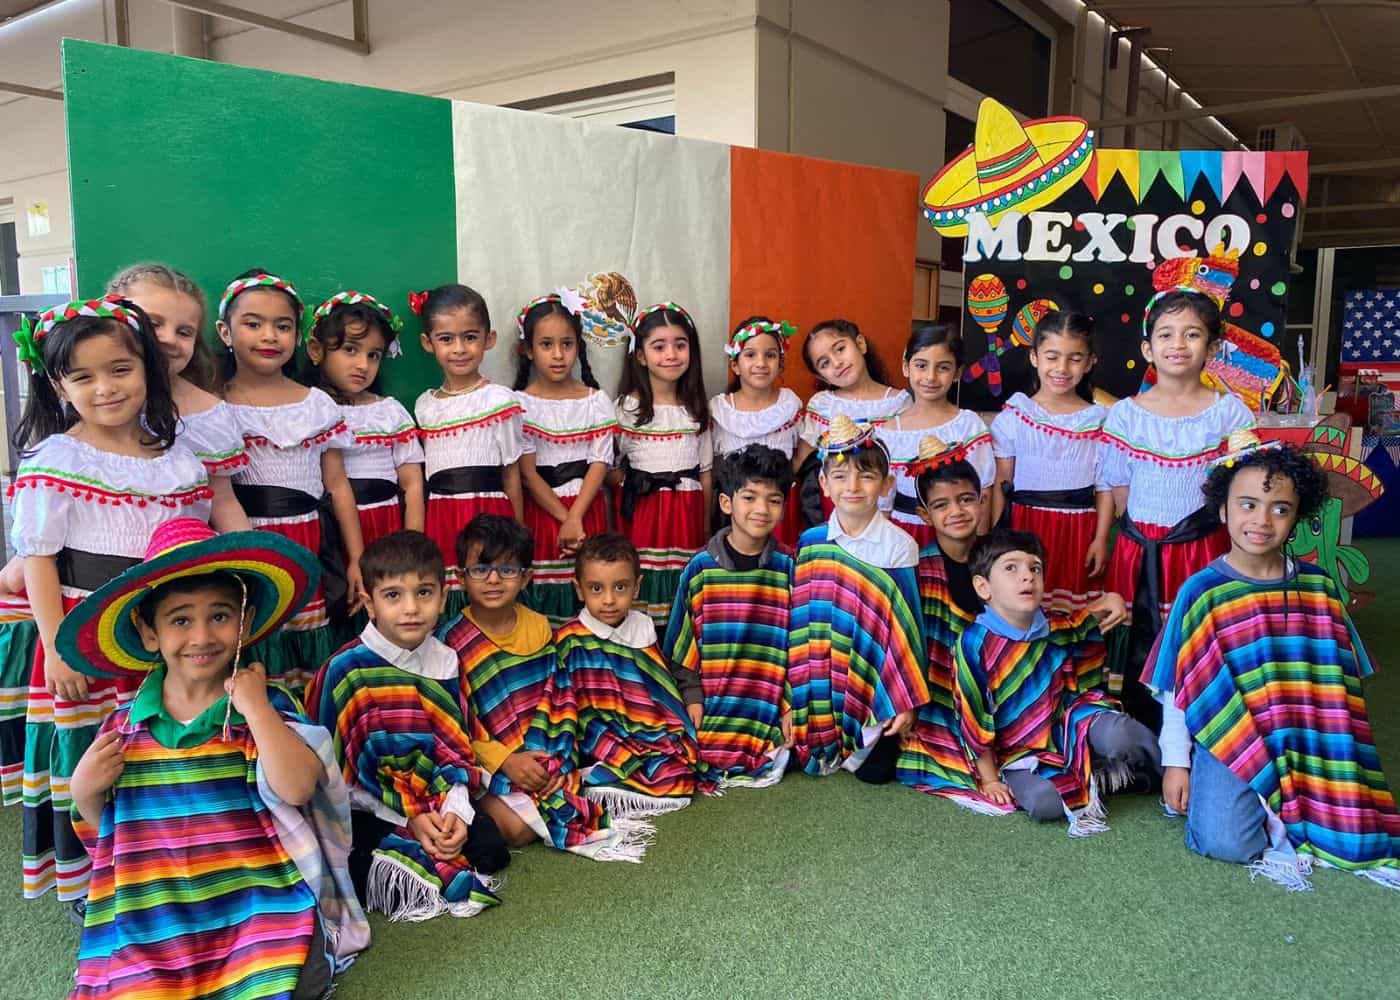 Elementary students of Abu Dhabi International School at the Global Markey Day event